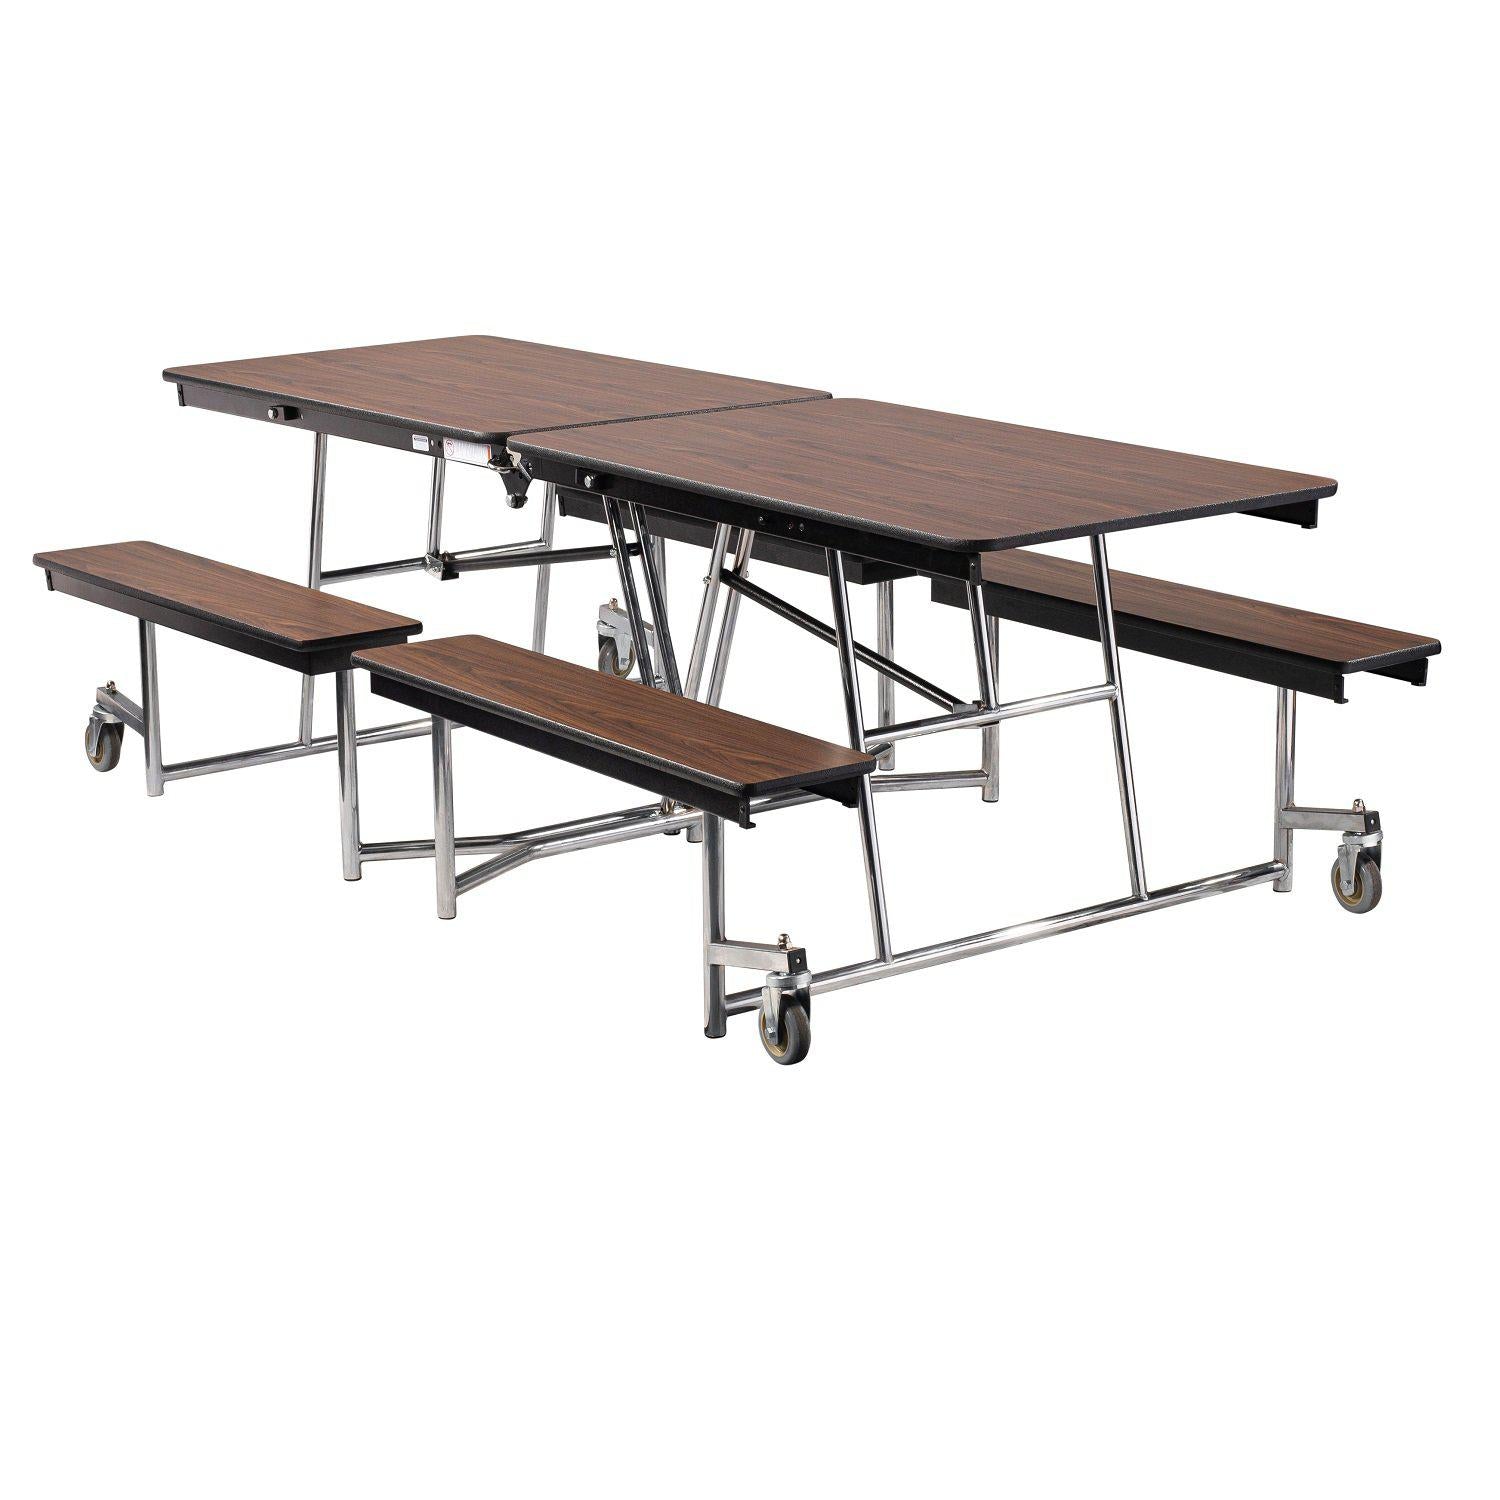 Mobile Cafeteria Table with Benches, 8'L, Particleboard Core, Vinyl T-Mold Edge, Chrome Frame